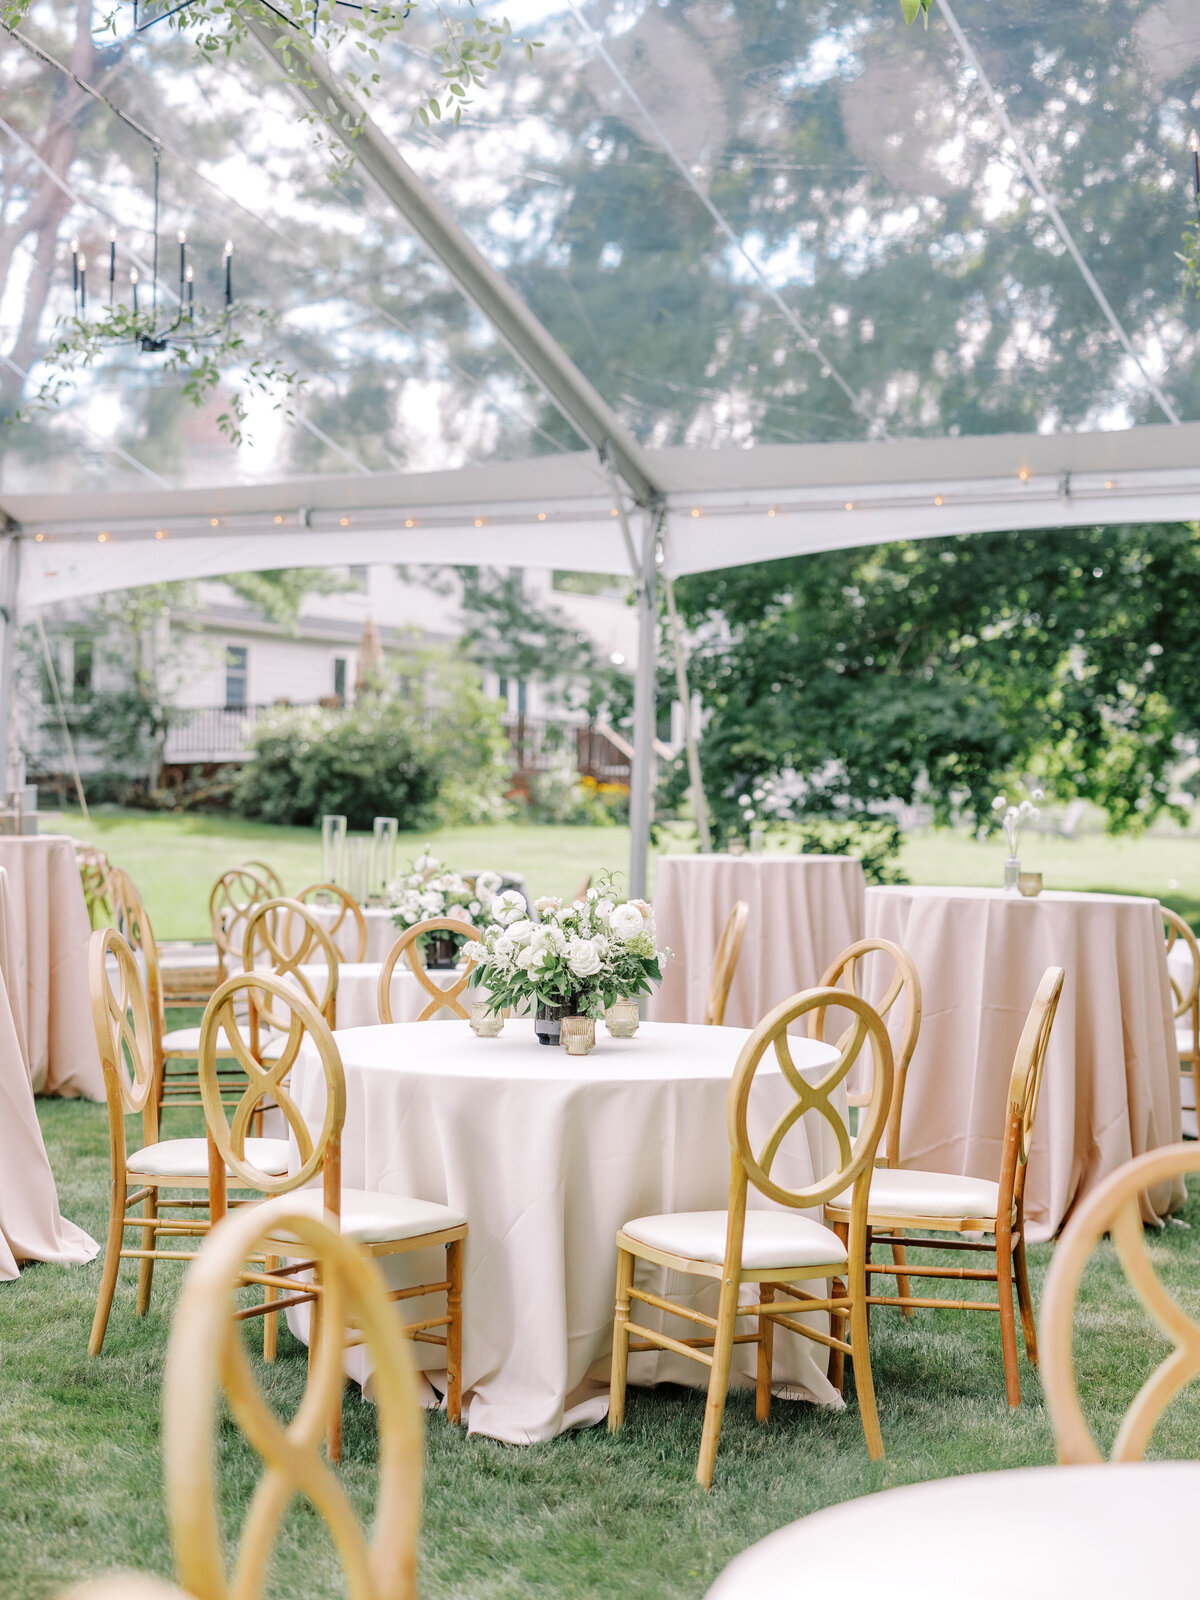 Wedding reception tables and chairs with floral centerpieces under a clear tent